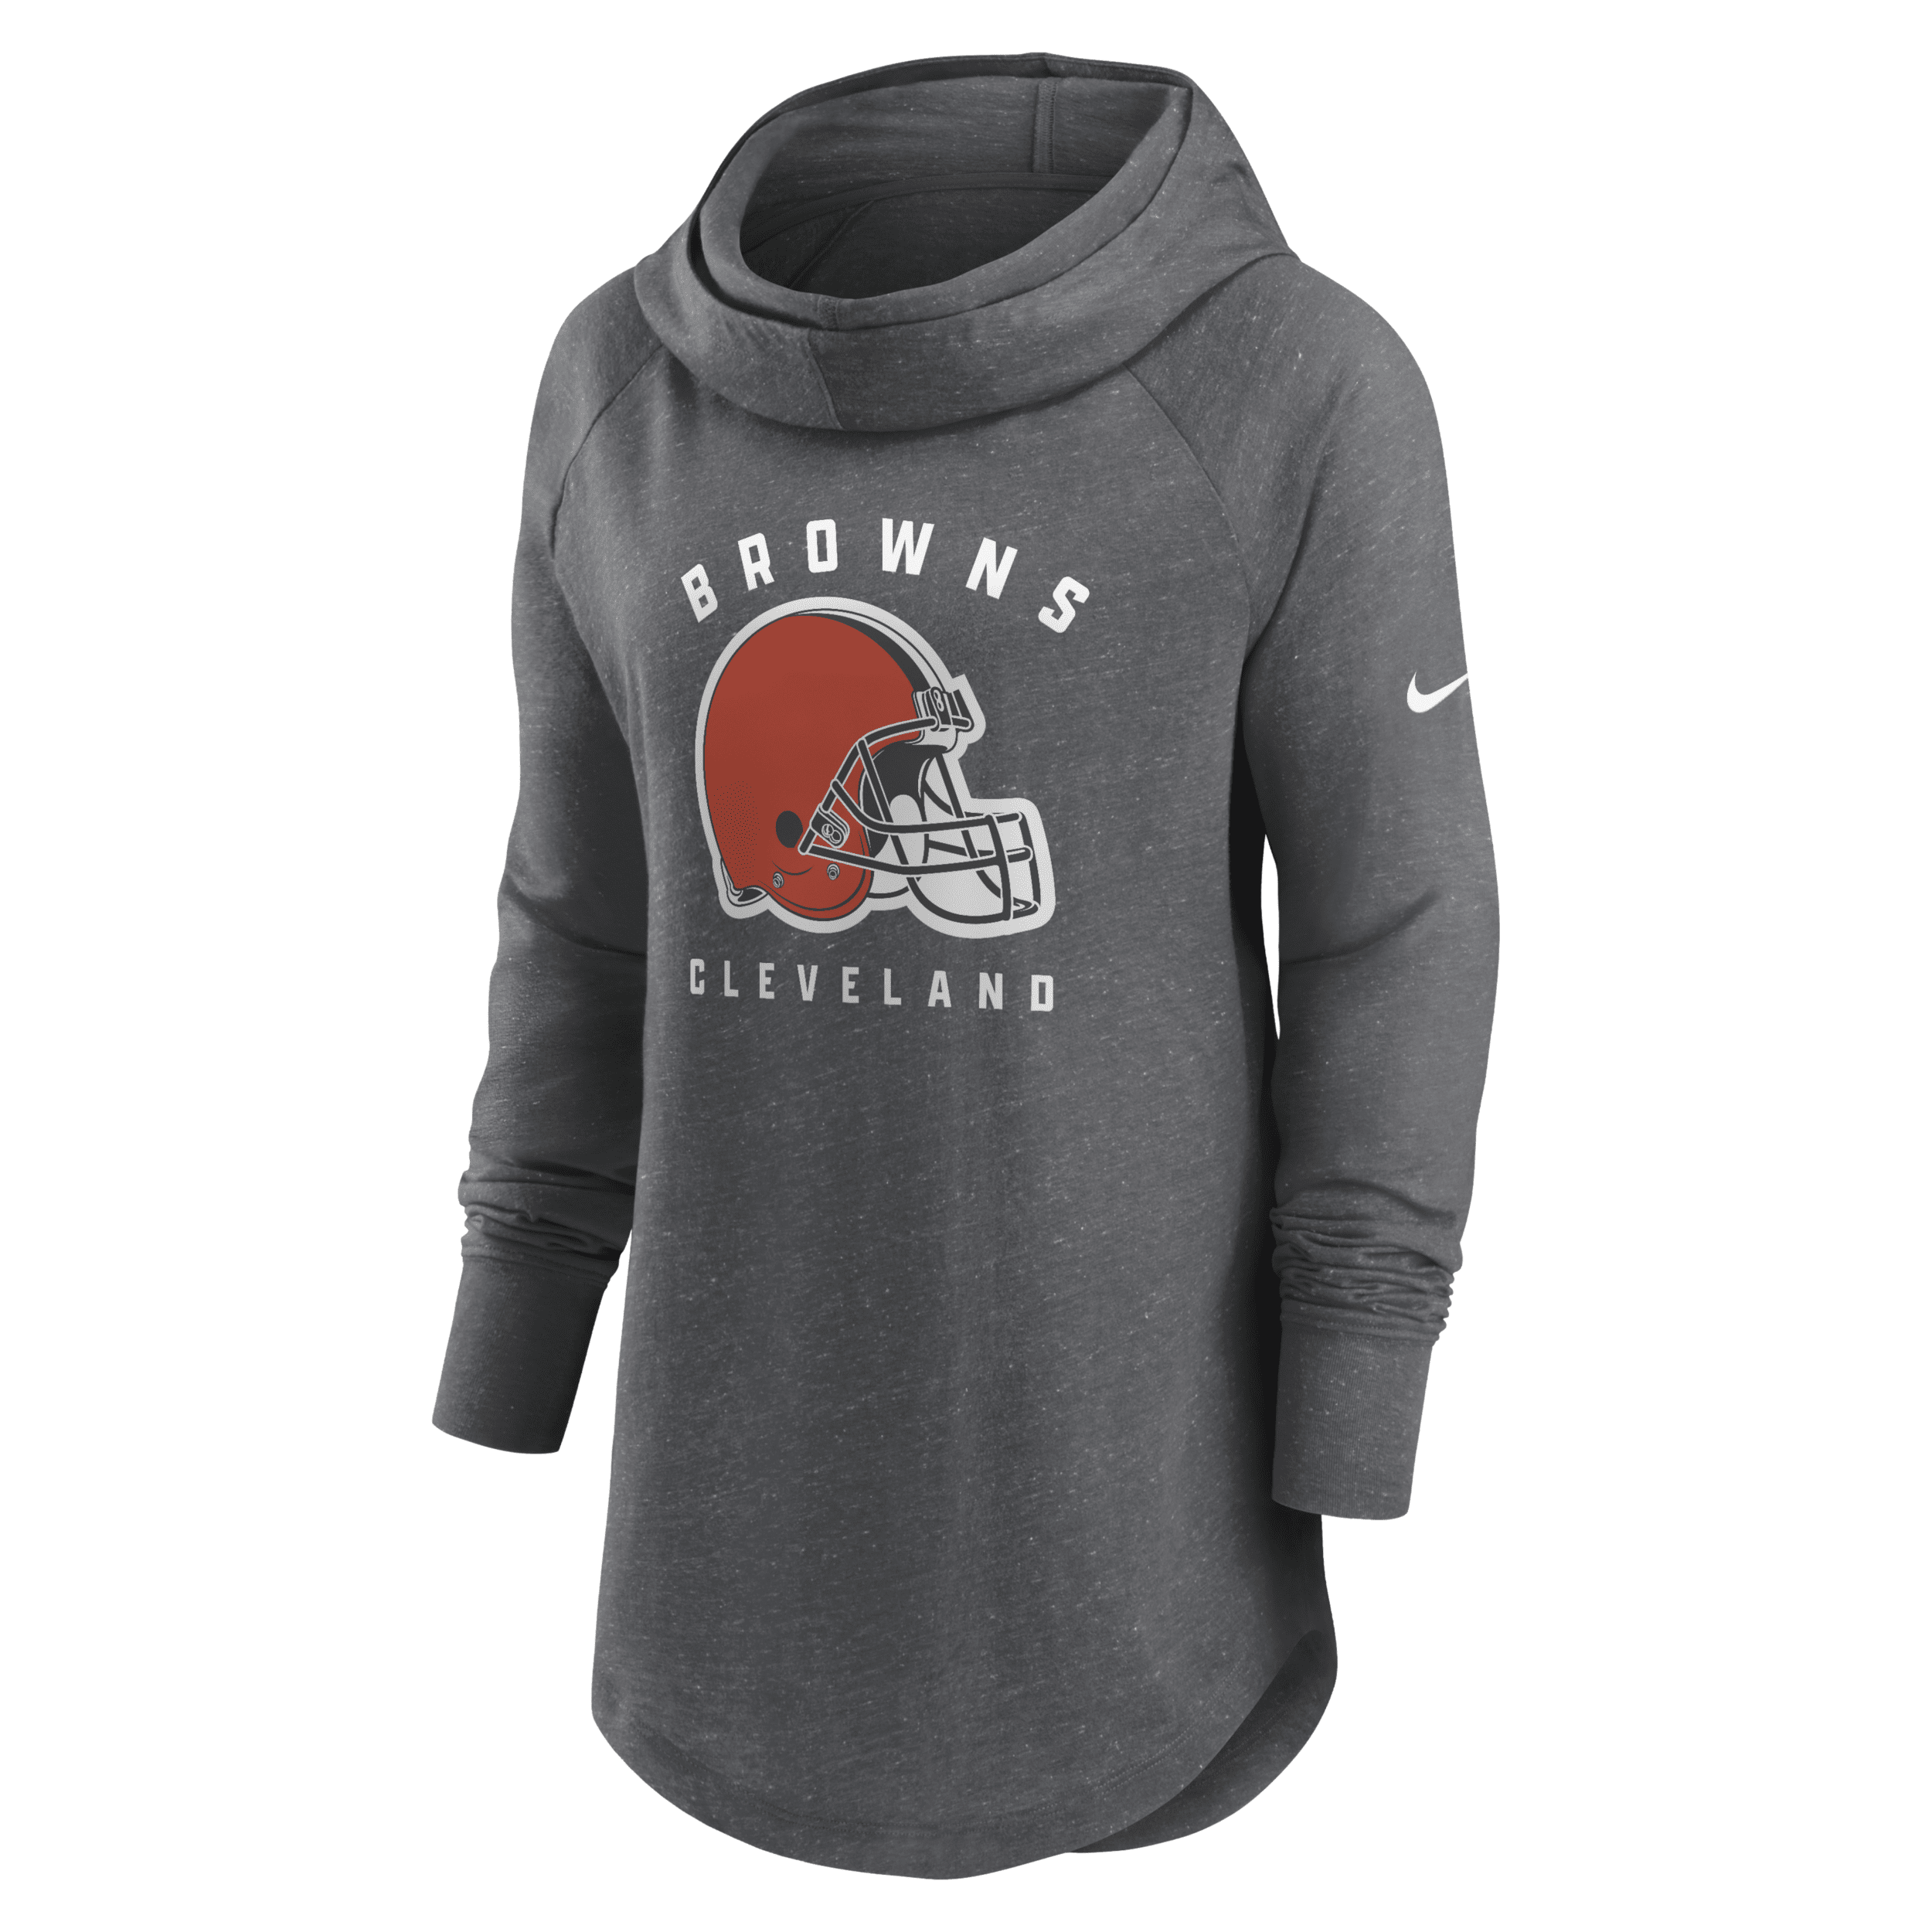 Nike Women's Team (nfl Cleveland Browns) Pullover Hoodie In Grey